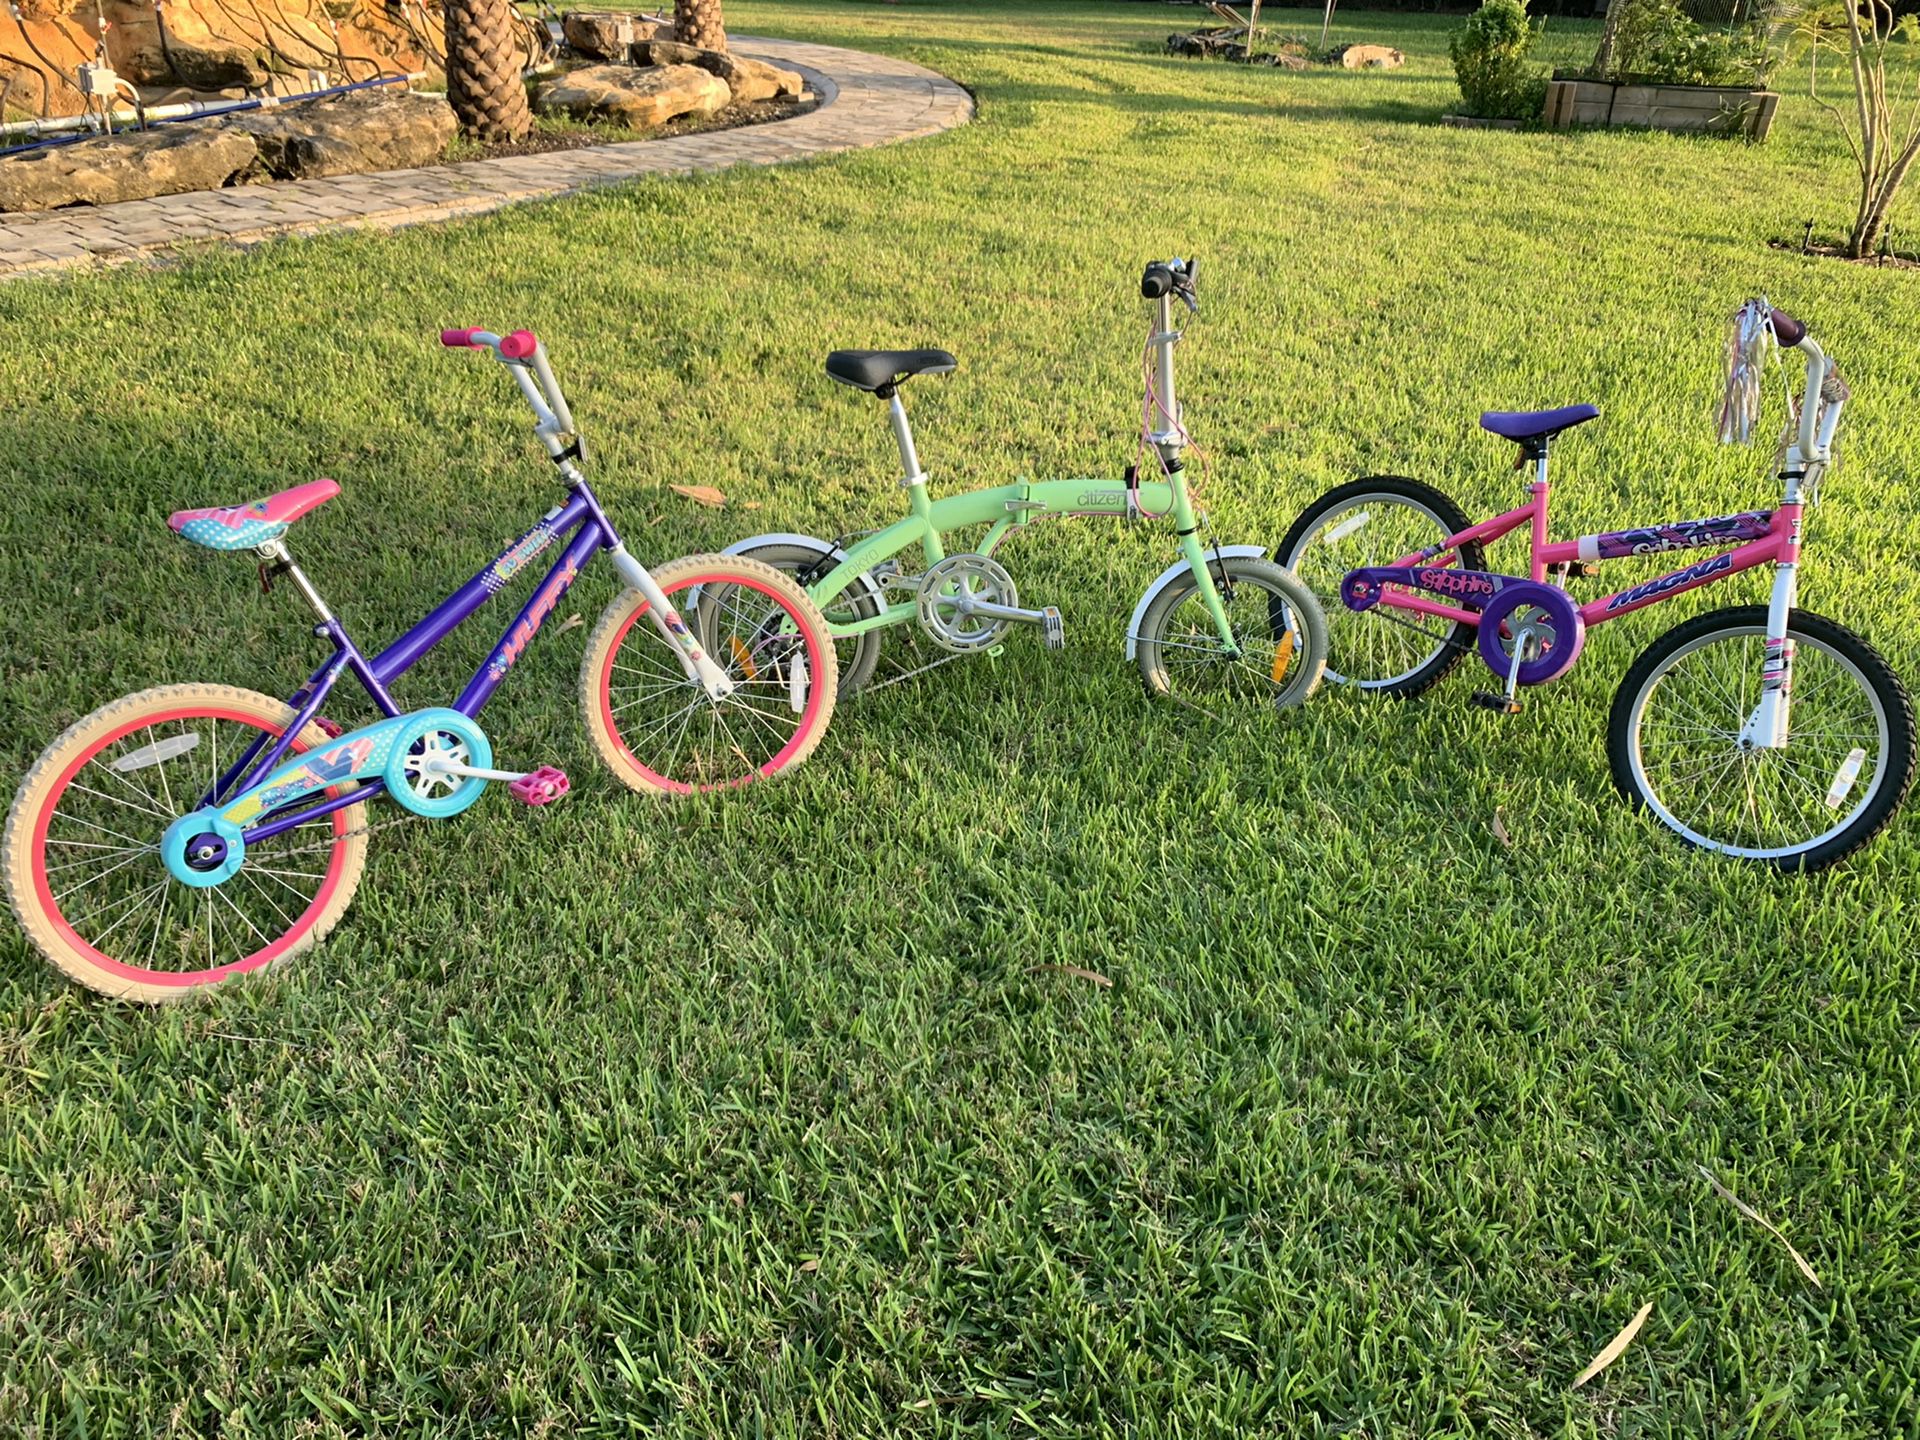 Three bicycles ... 65 or best offer !!!